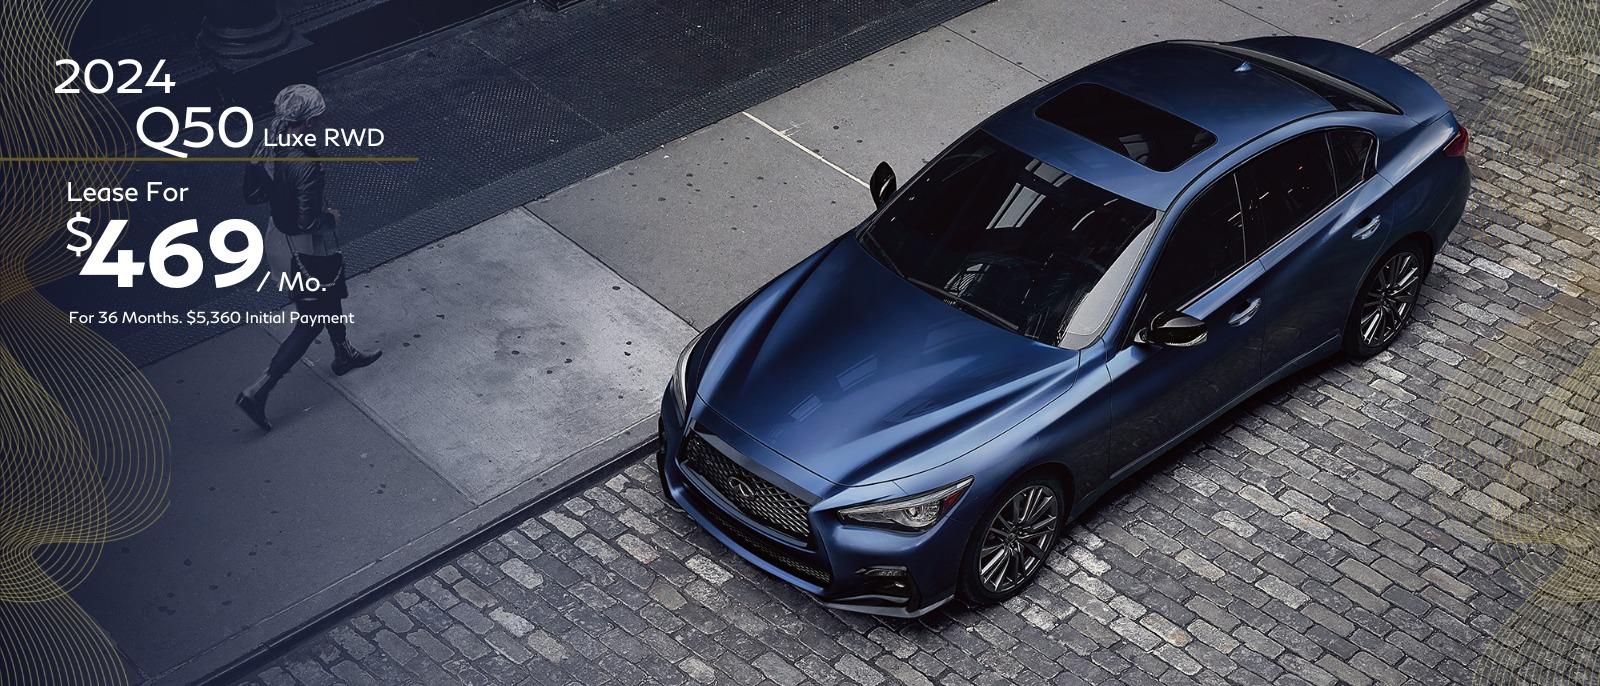 2024 Q50 LUXE RWD Lease 36 Months - $469/Month - $5,360 initial payment.